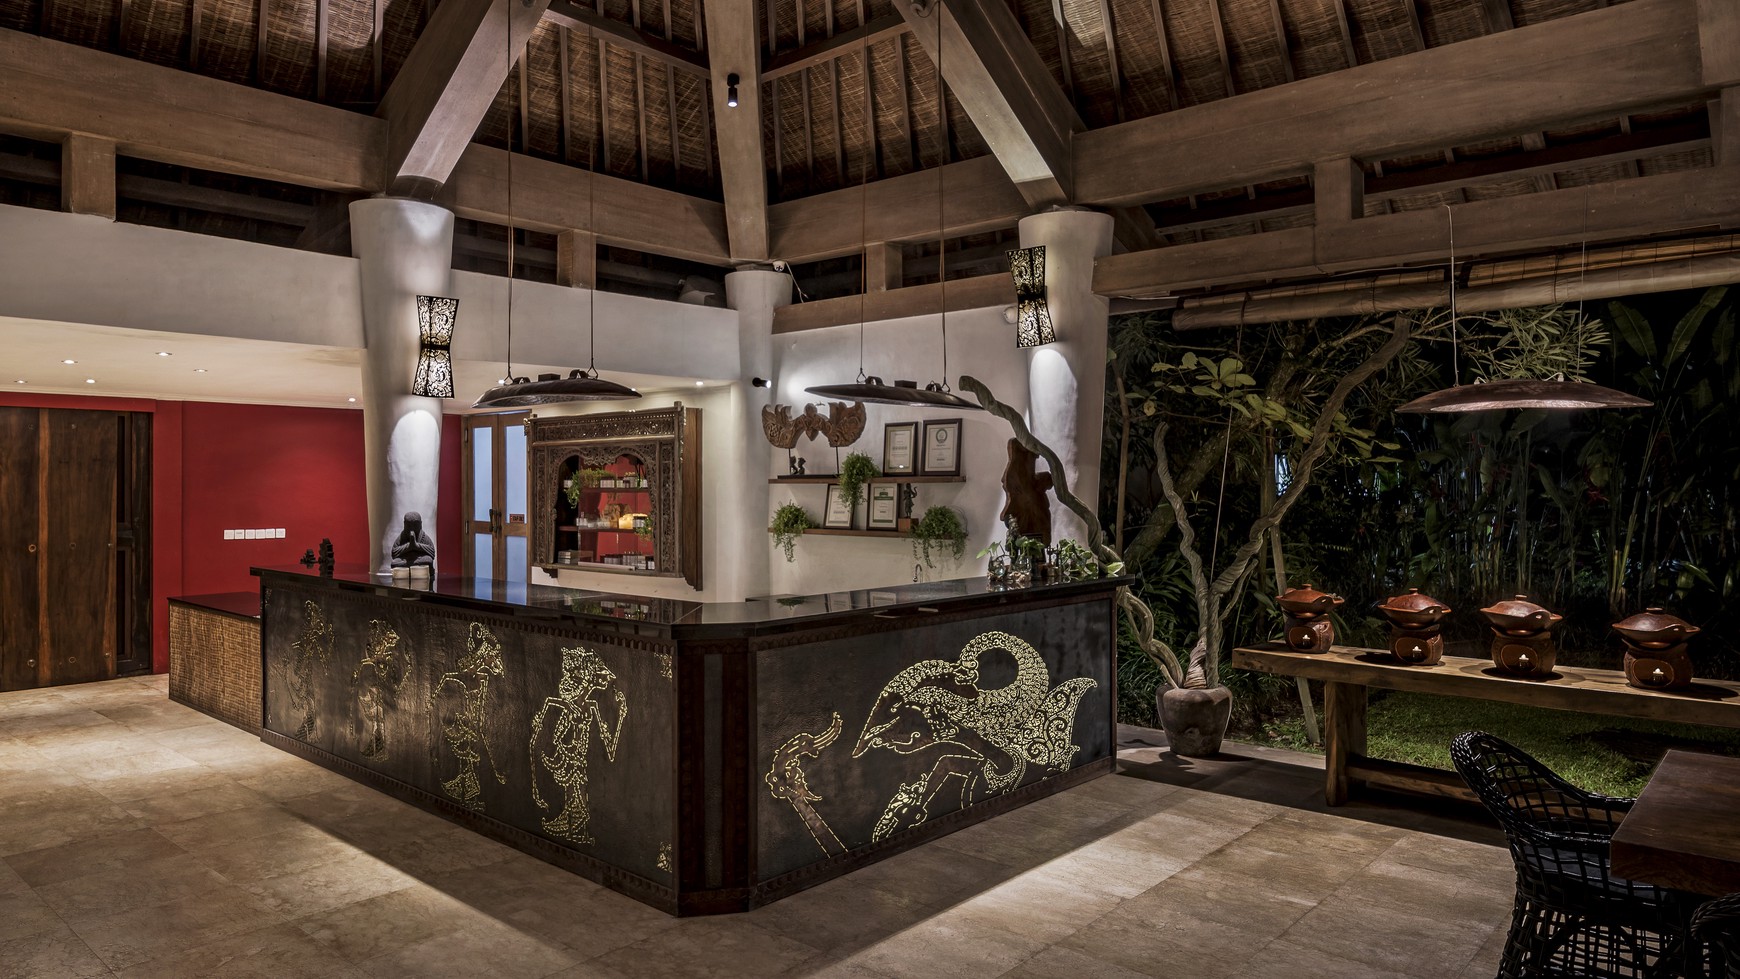 Amazing Private Resort In The Heart Of Ubud [5 star rated on TripAdvisor]